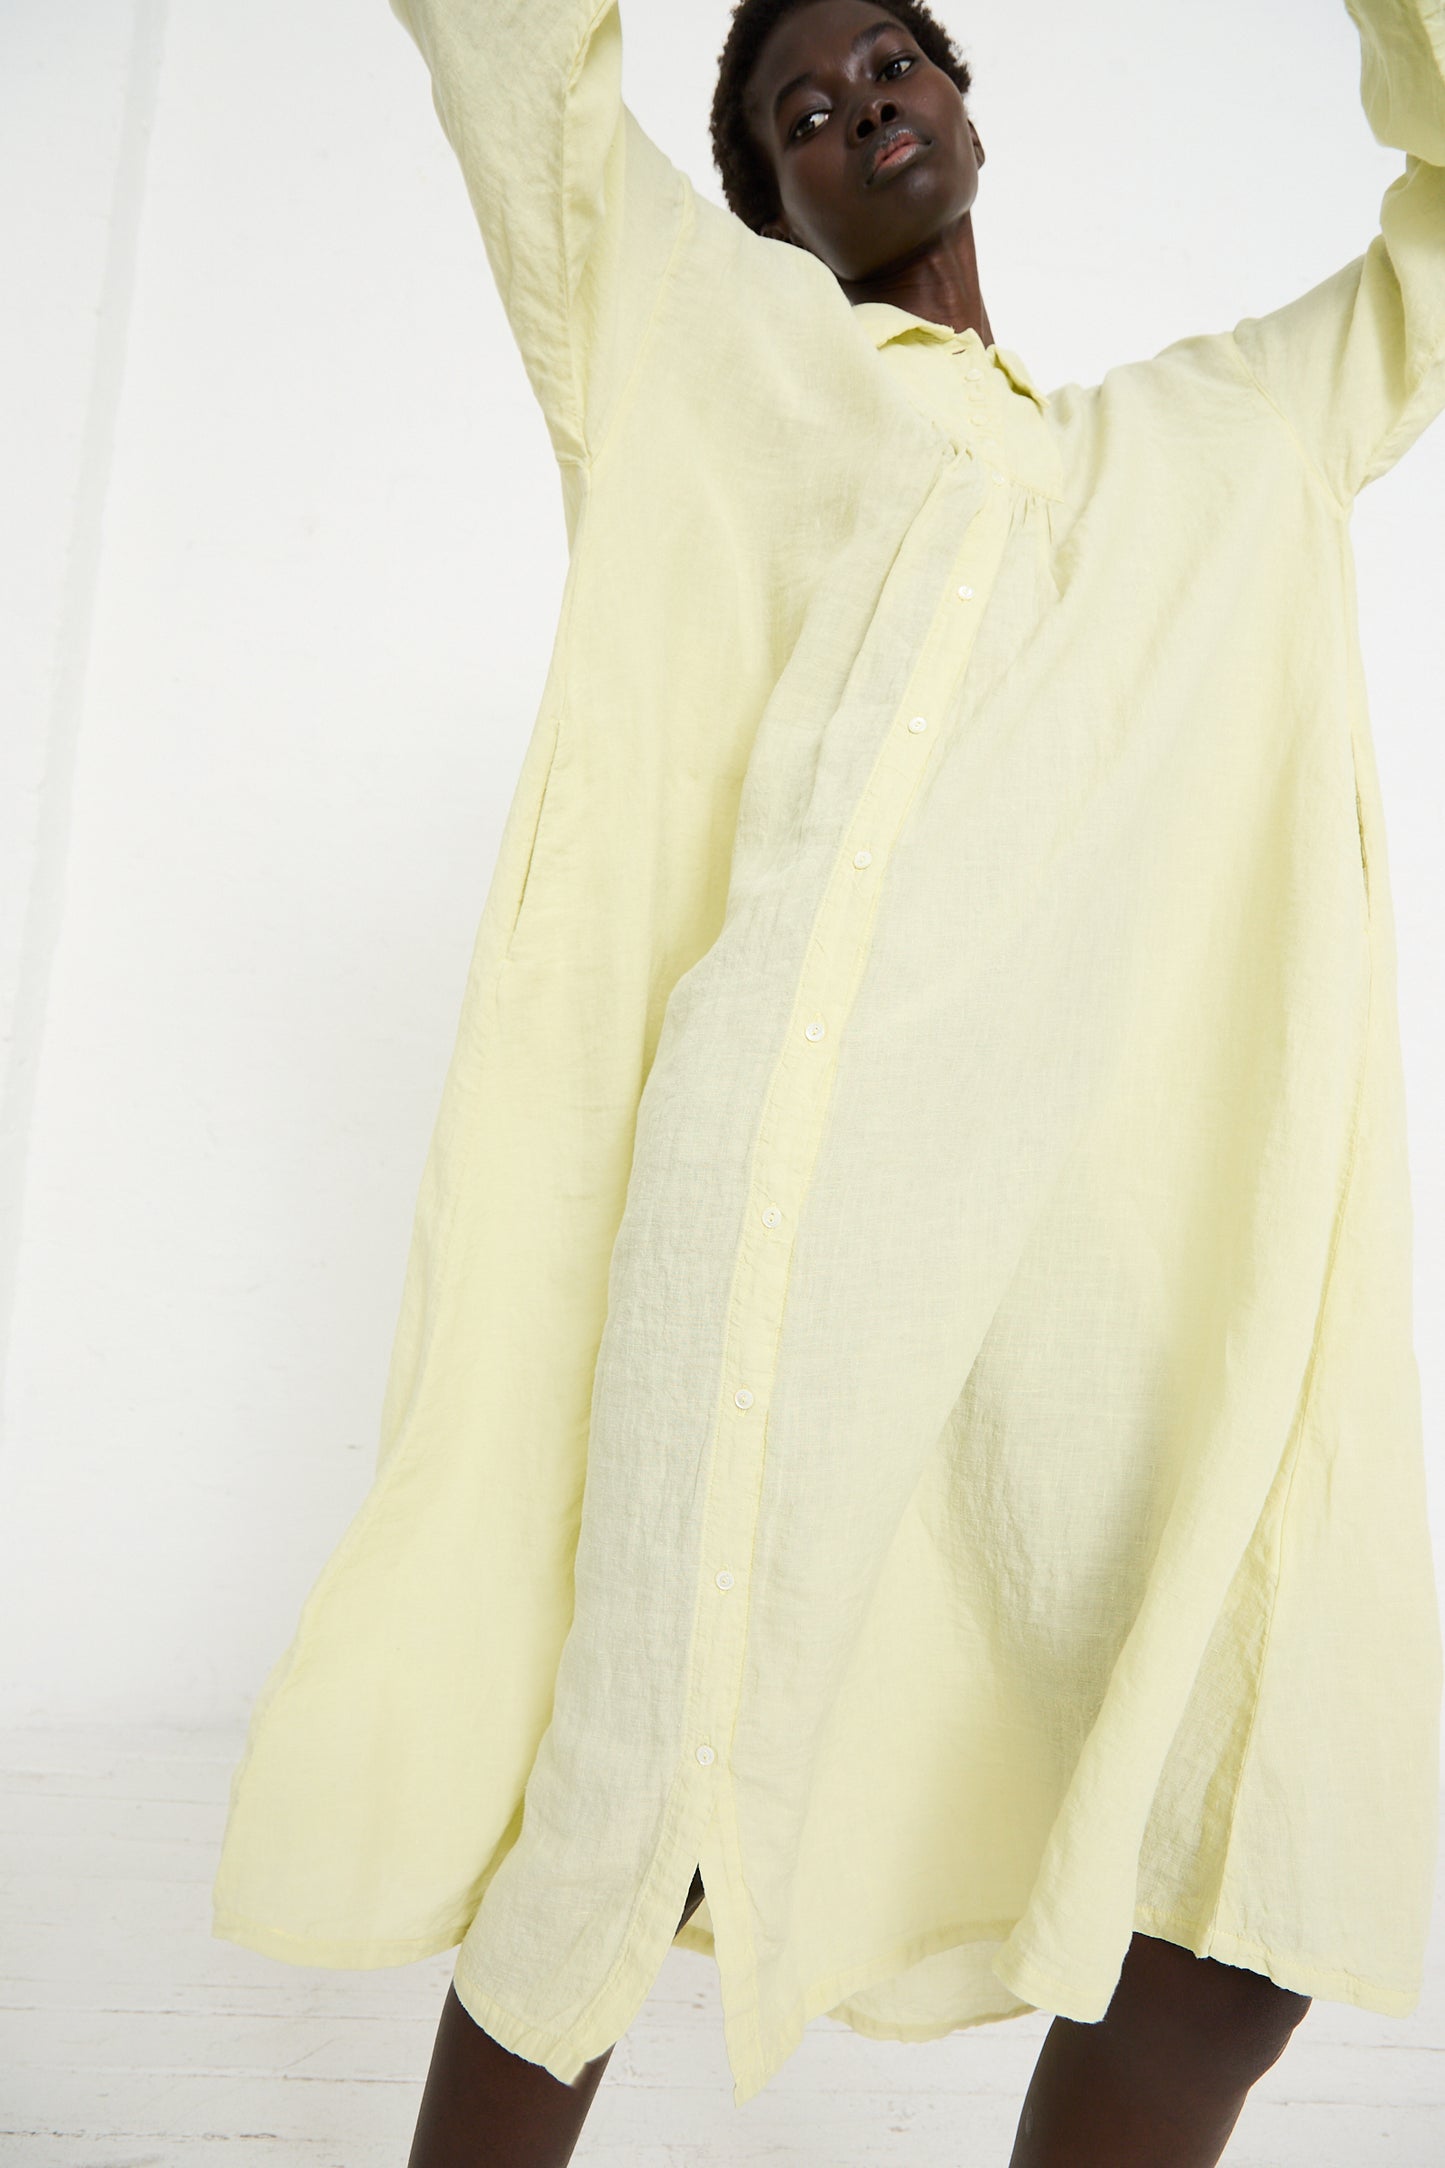 A person wearing a long, Linen Omi-Zarashi Shirt Dress in Lemon by nest Robe with their arms raised, standing against a white background.